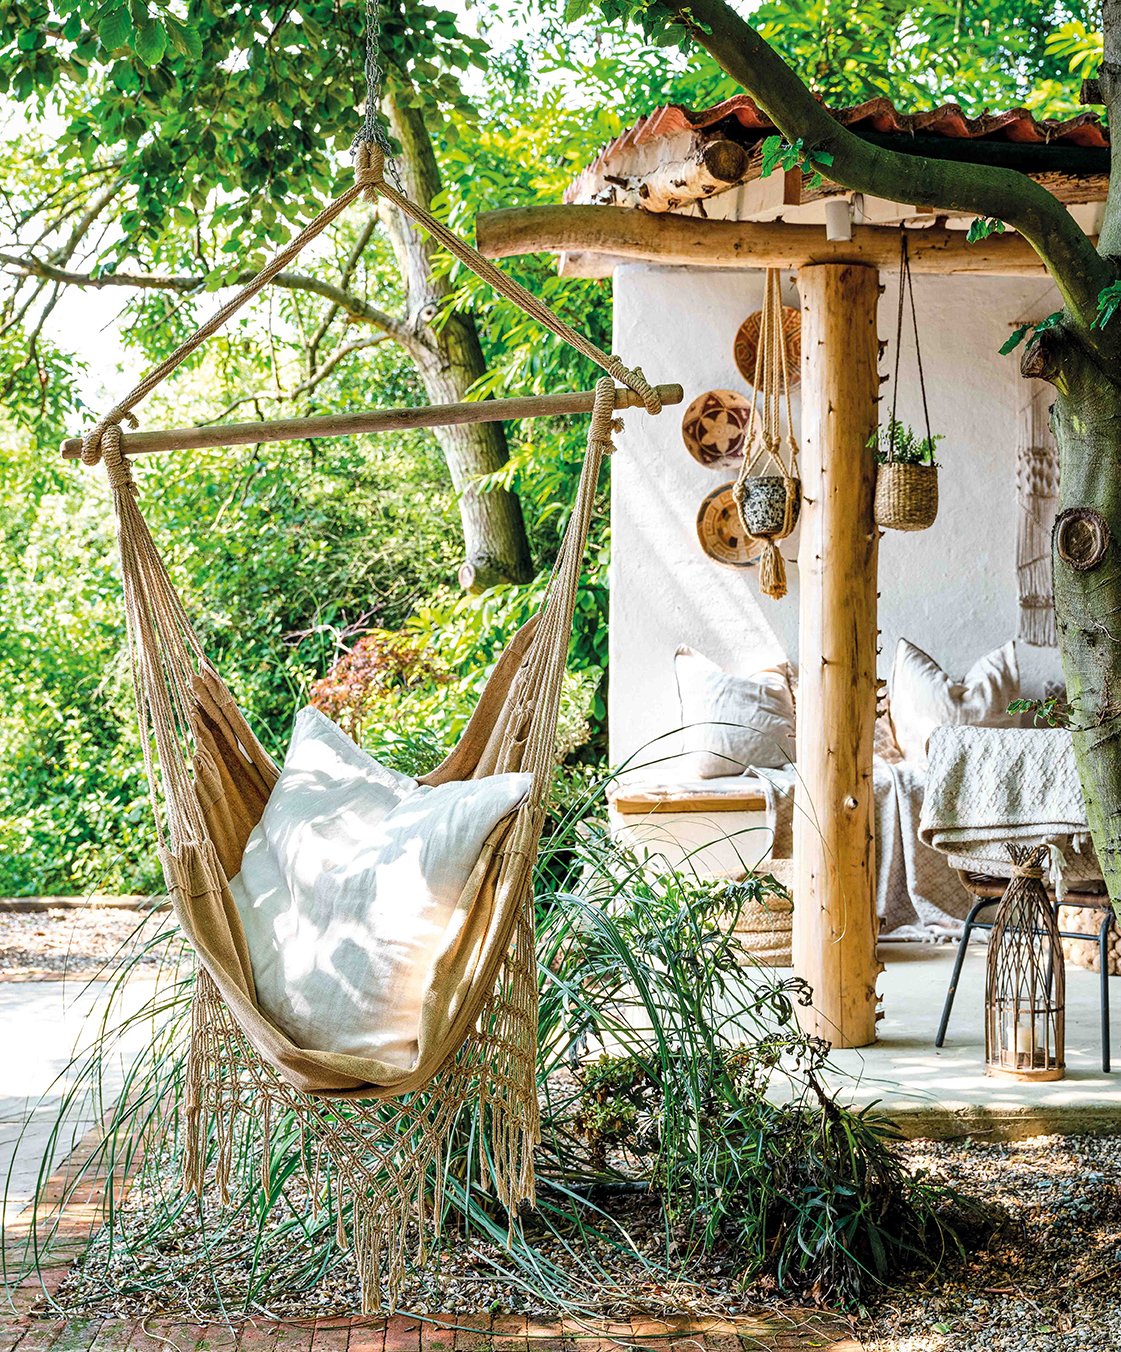 Hanging hammock chair in a bohemian style outdoor space